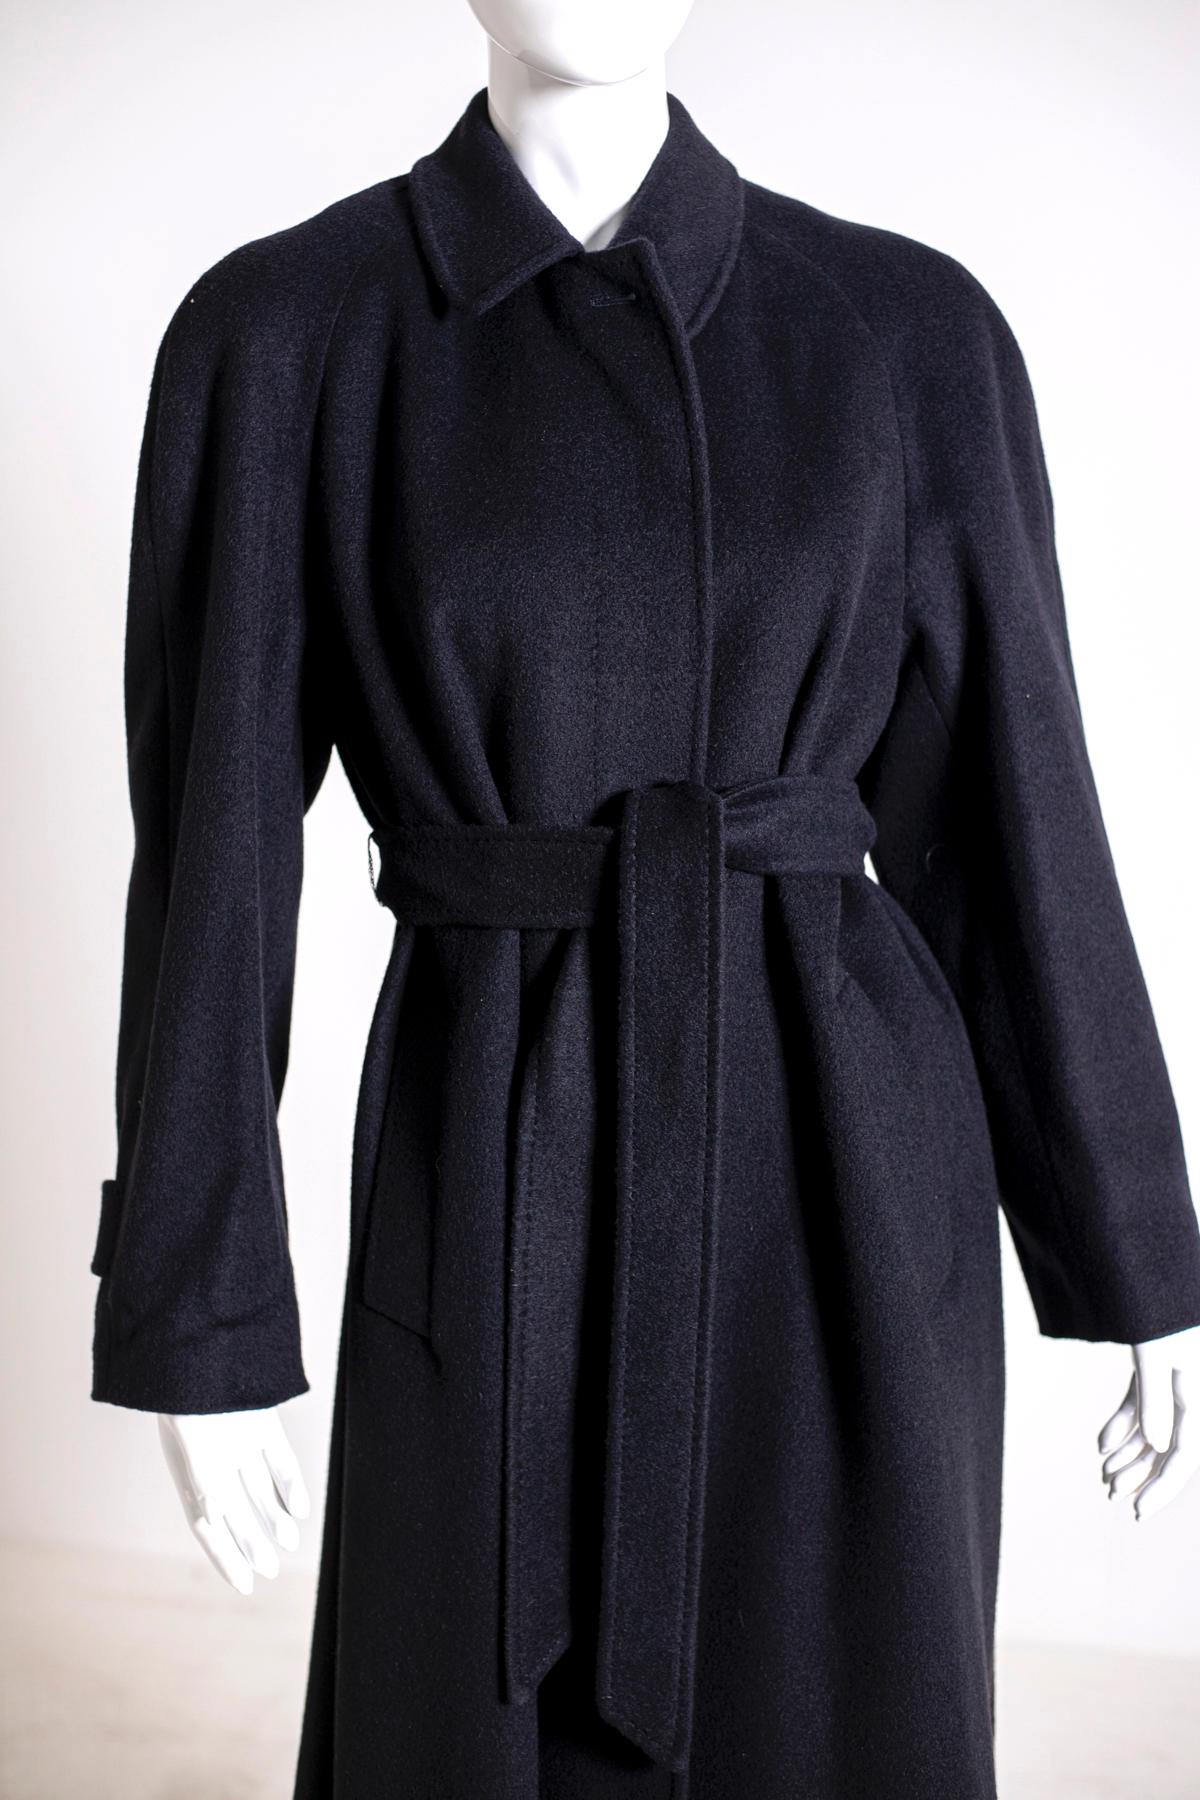 Wonderful woman's coat Aquascutum of the 90s, in 100% black camel hair.
Its line is classic, with five buttons on the front and two comfortable side pockets, ankle-length. Inside it is lined with 100% viscose and rayon.
New with label and never